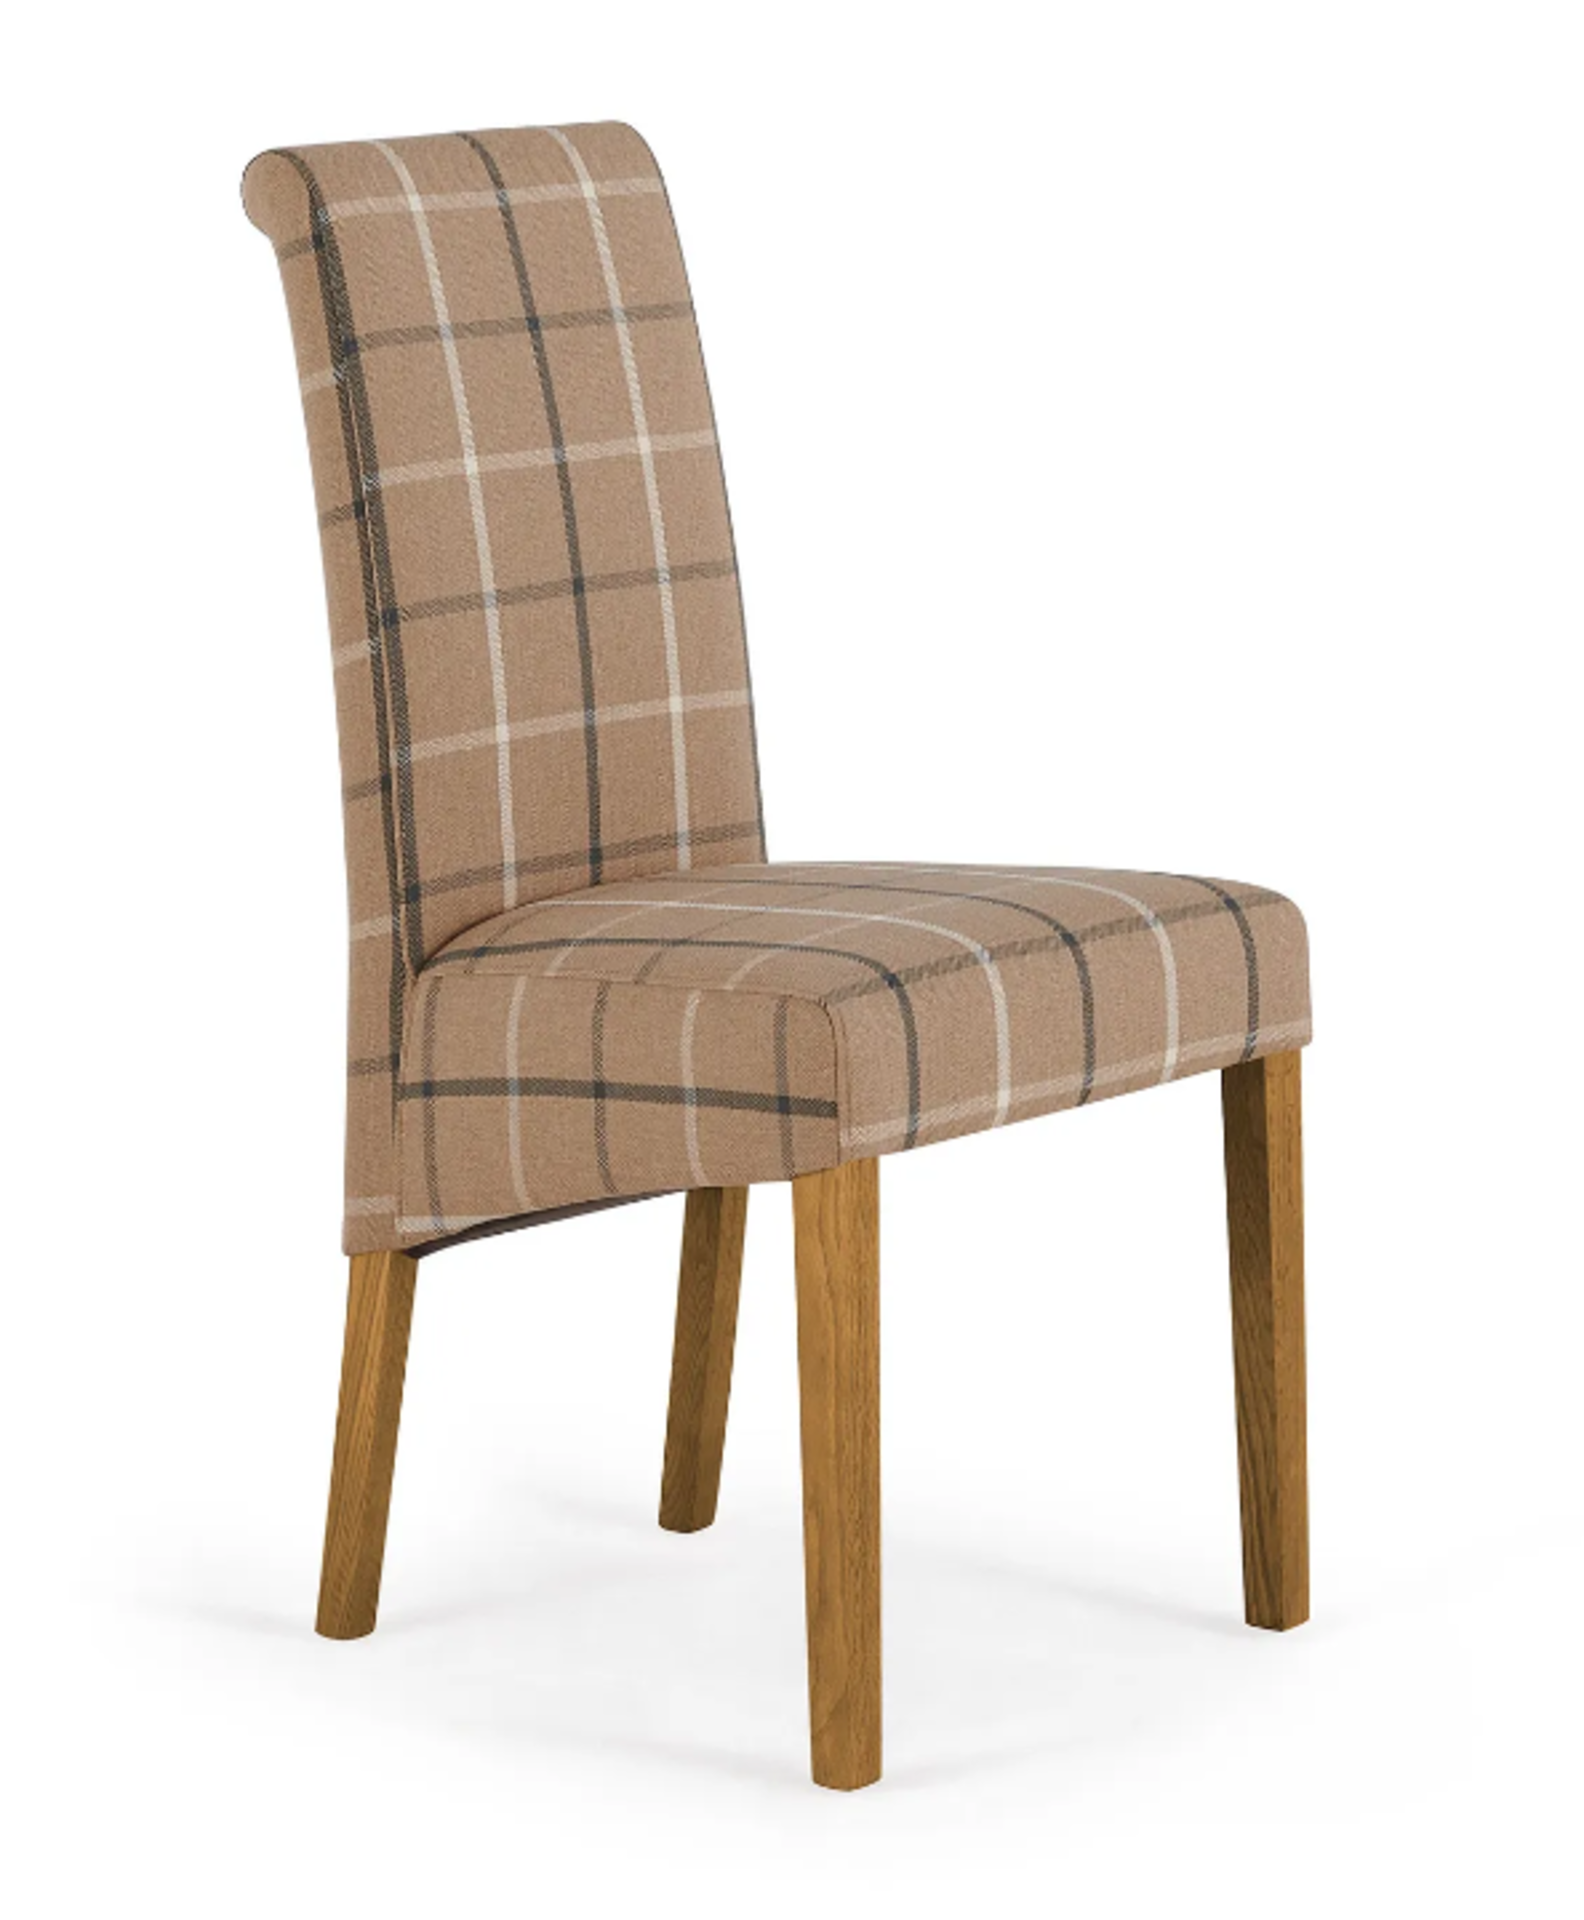 SCROLL BACK NATURAL/RUSTIC Checked Latte Fabric Dining Chair. RRP £190.00. This classic yet modern